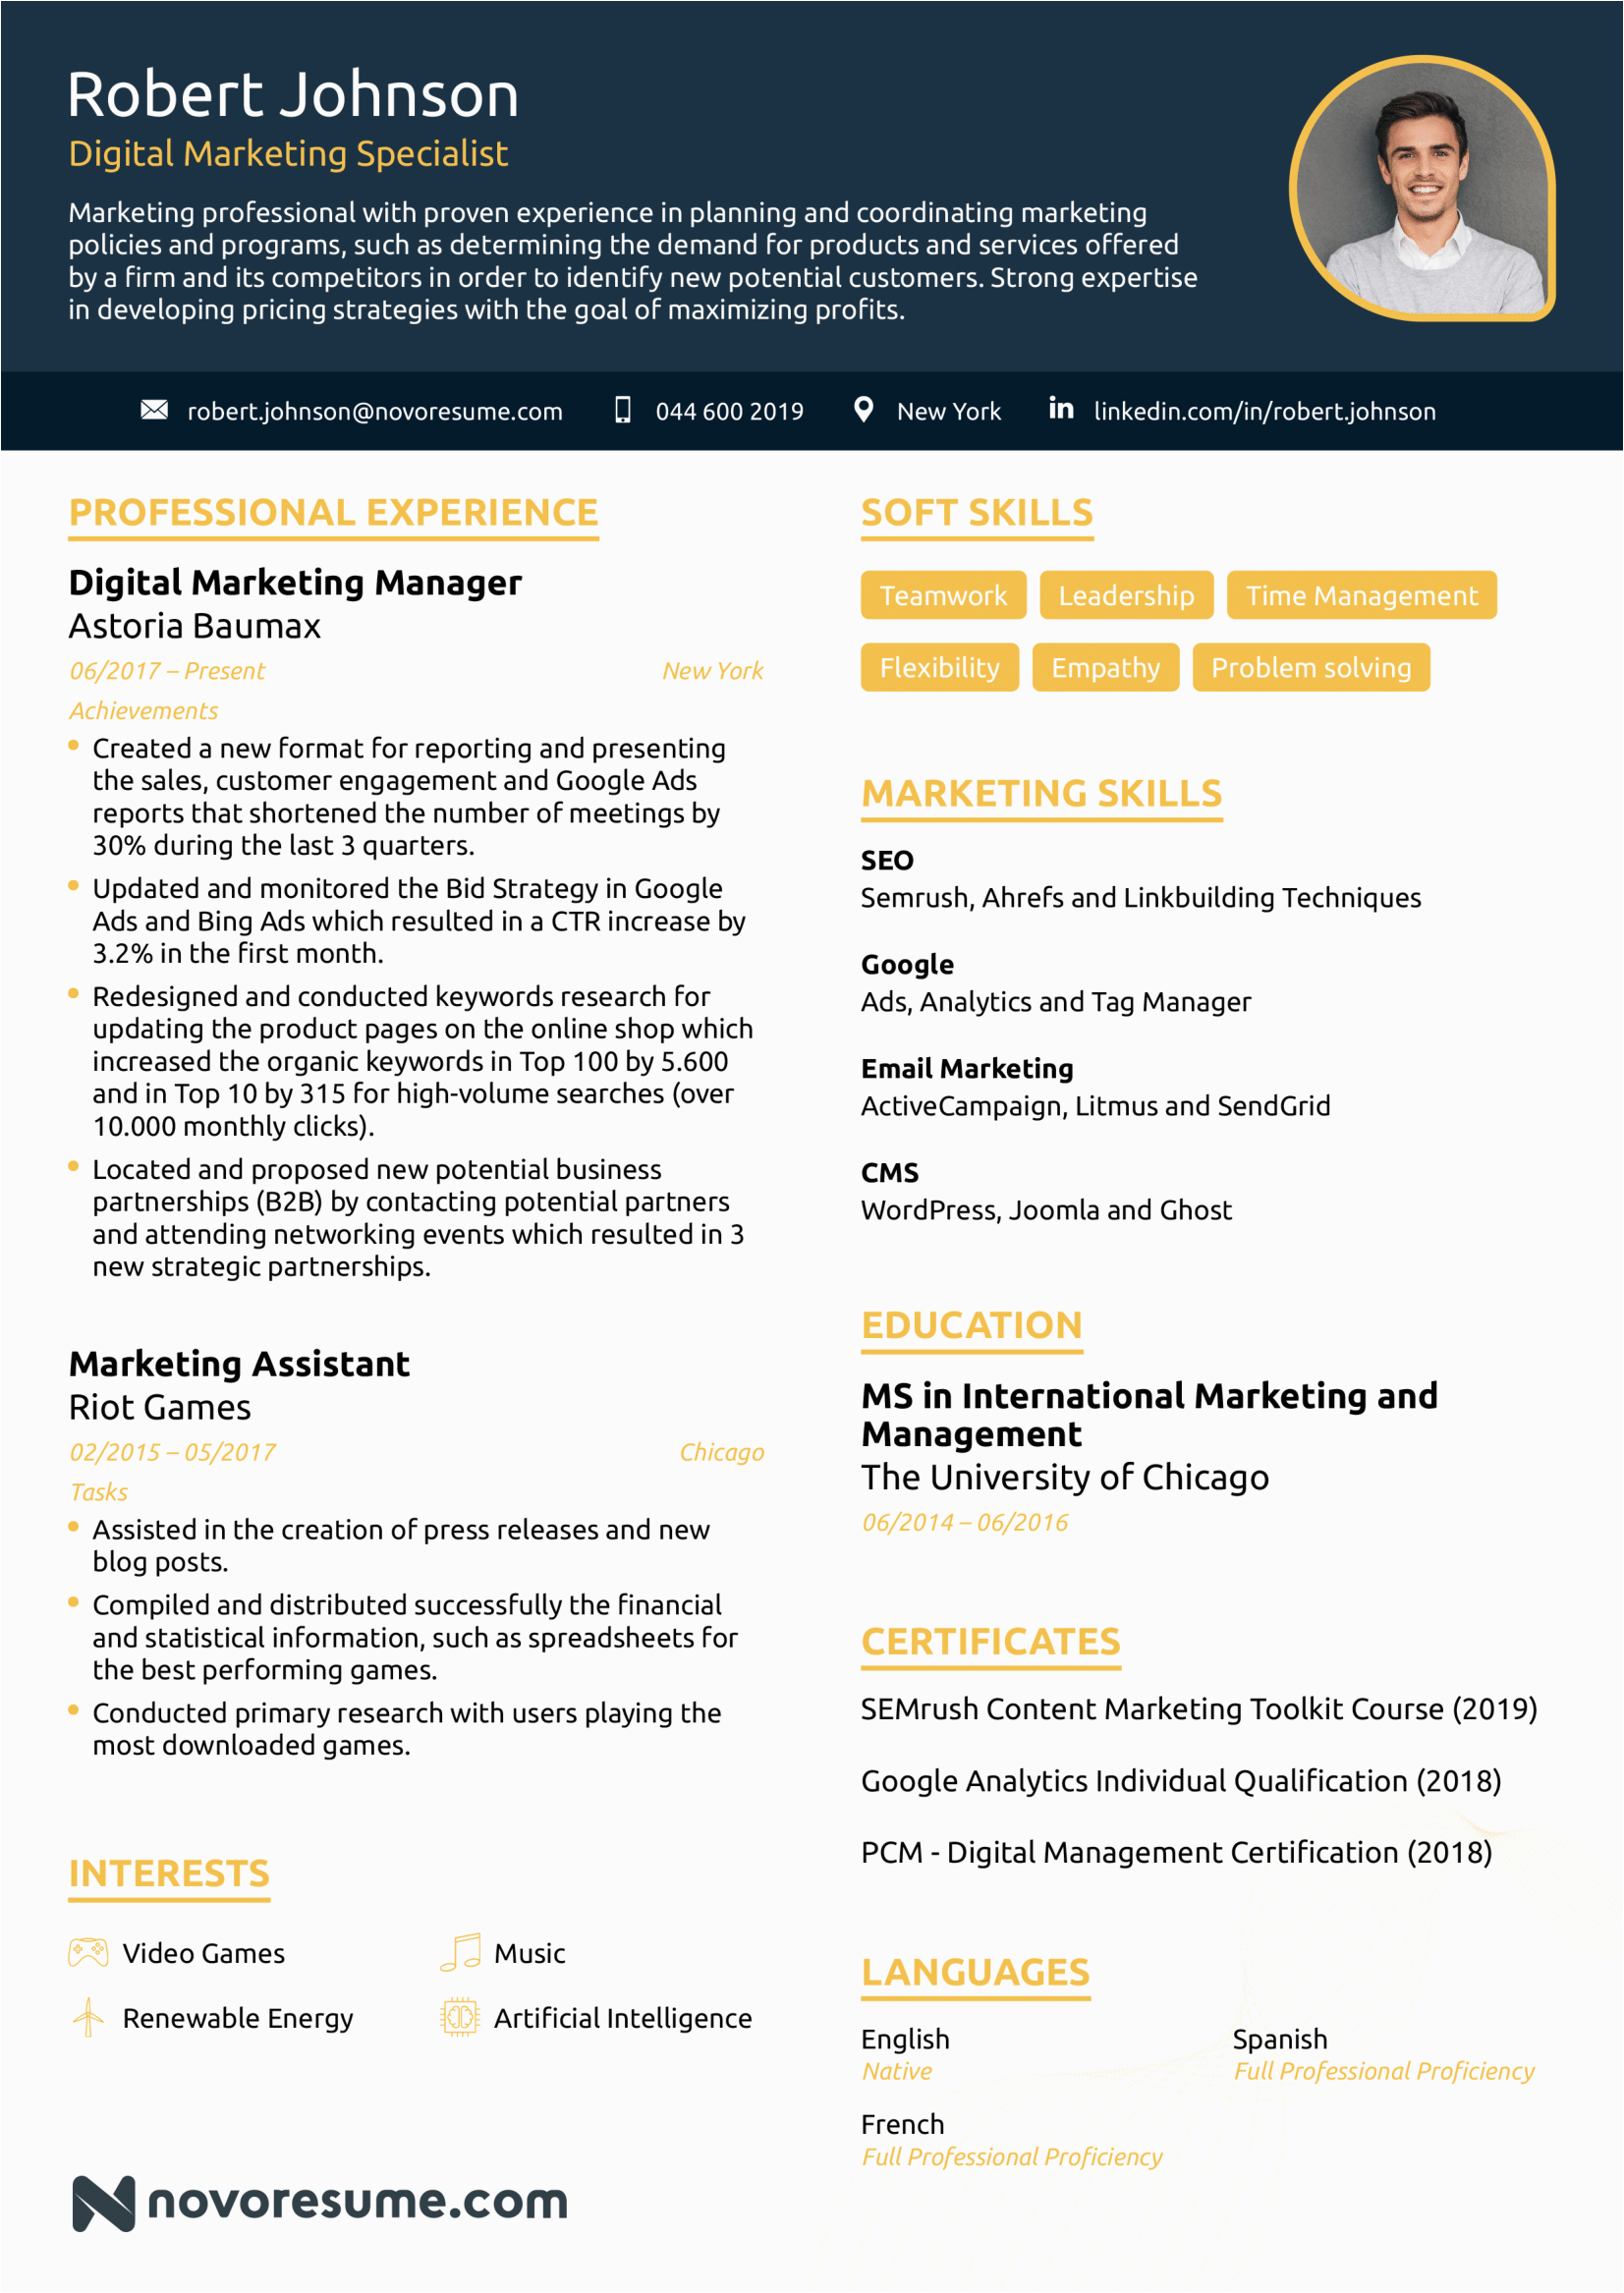 Sample Resume format for Marketing Professional How to Make A Resume for Marketing Jobs Free Samples Technojobs It